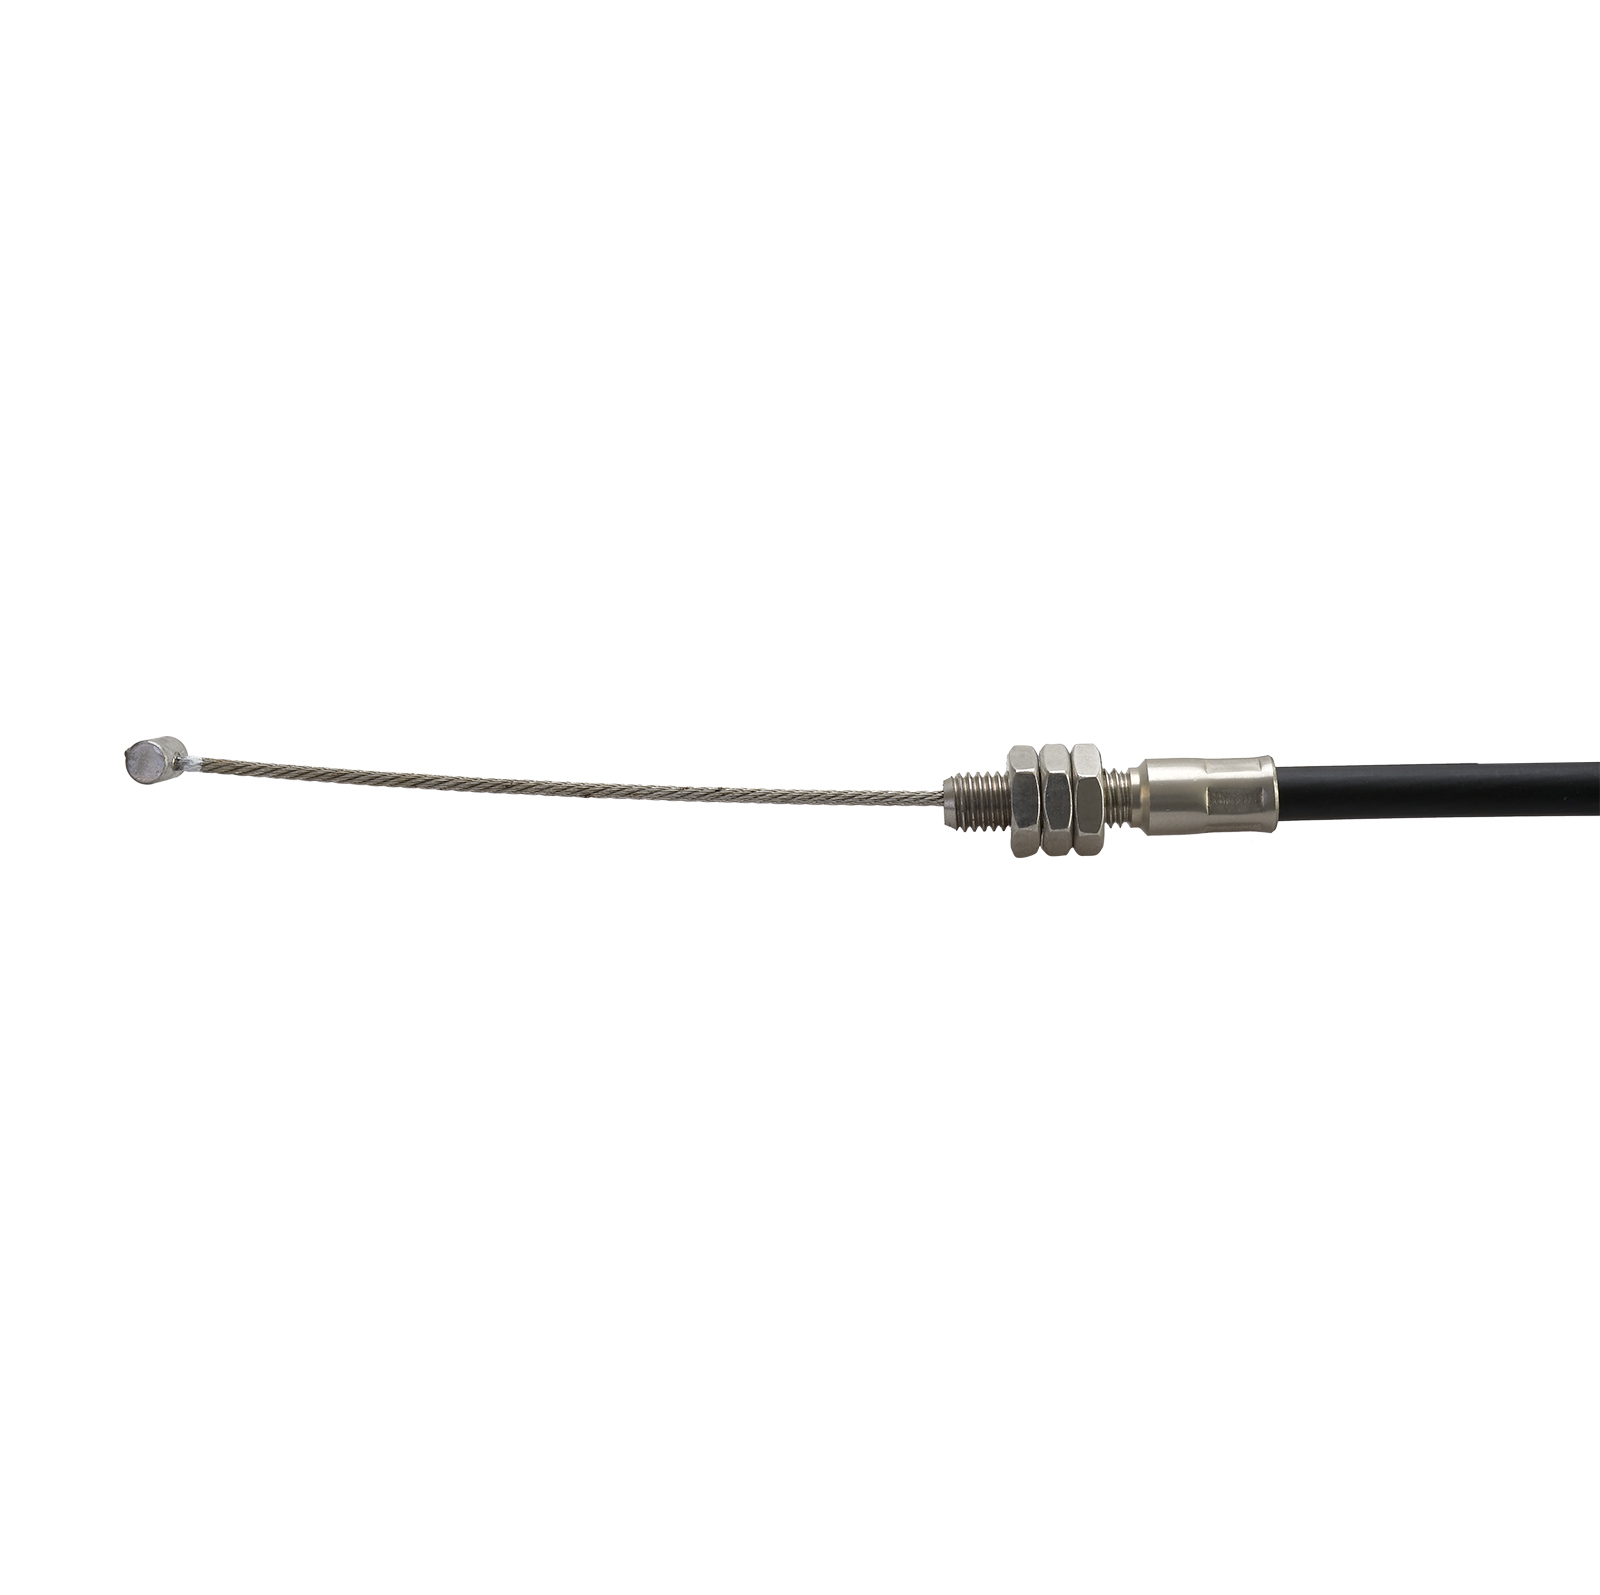 Trim Cable for Yamaha FX 140 /FX 1100 /FX HO /FX Cruiser HO F1B-U153D-01-00  2002-2007 2 required